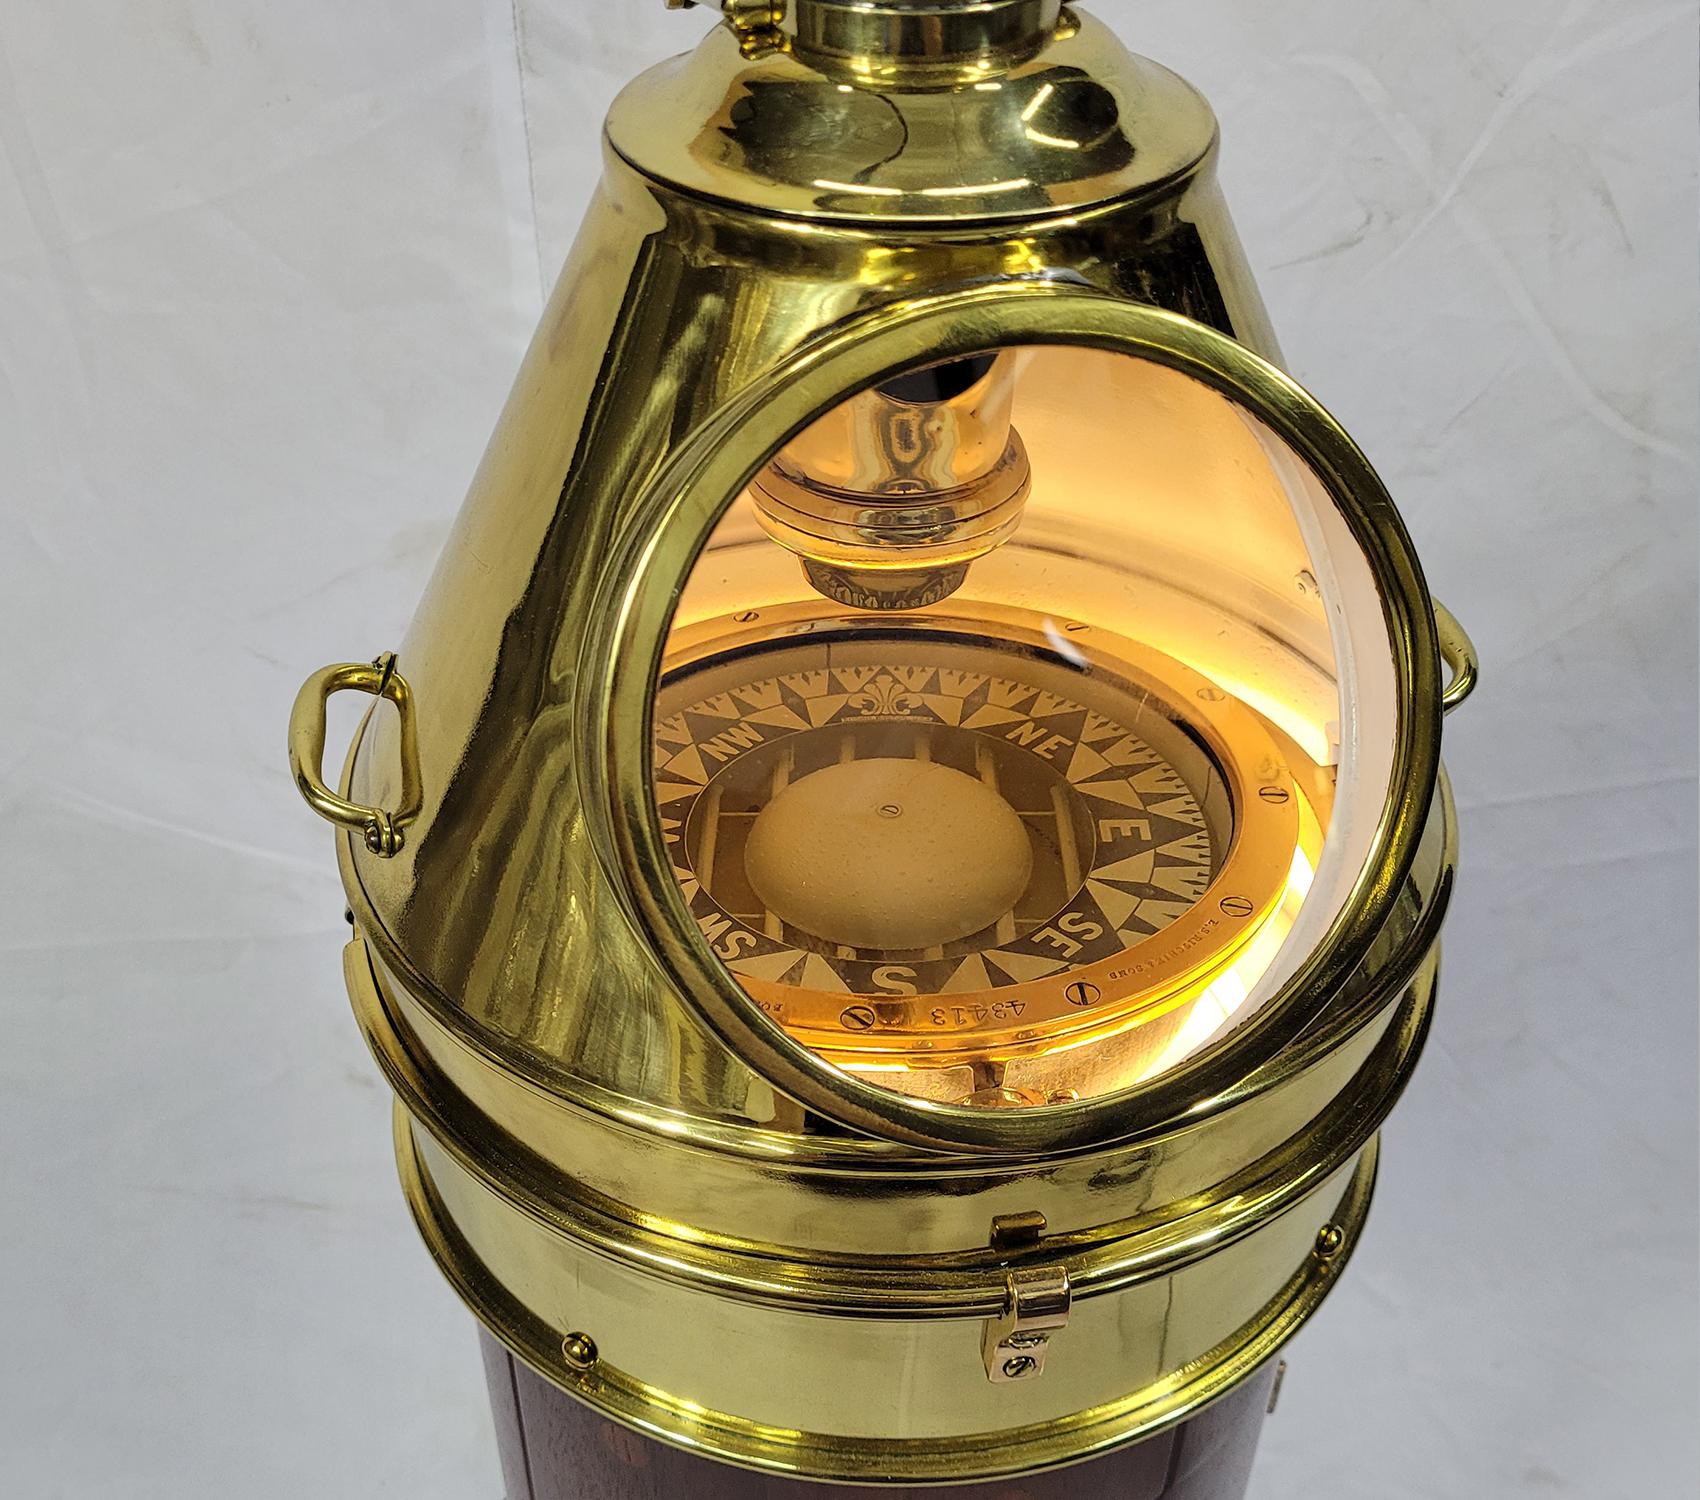 North American Brass and Wood Yacht Binnacle Compass For Sale